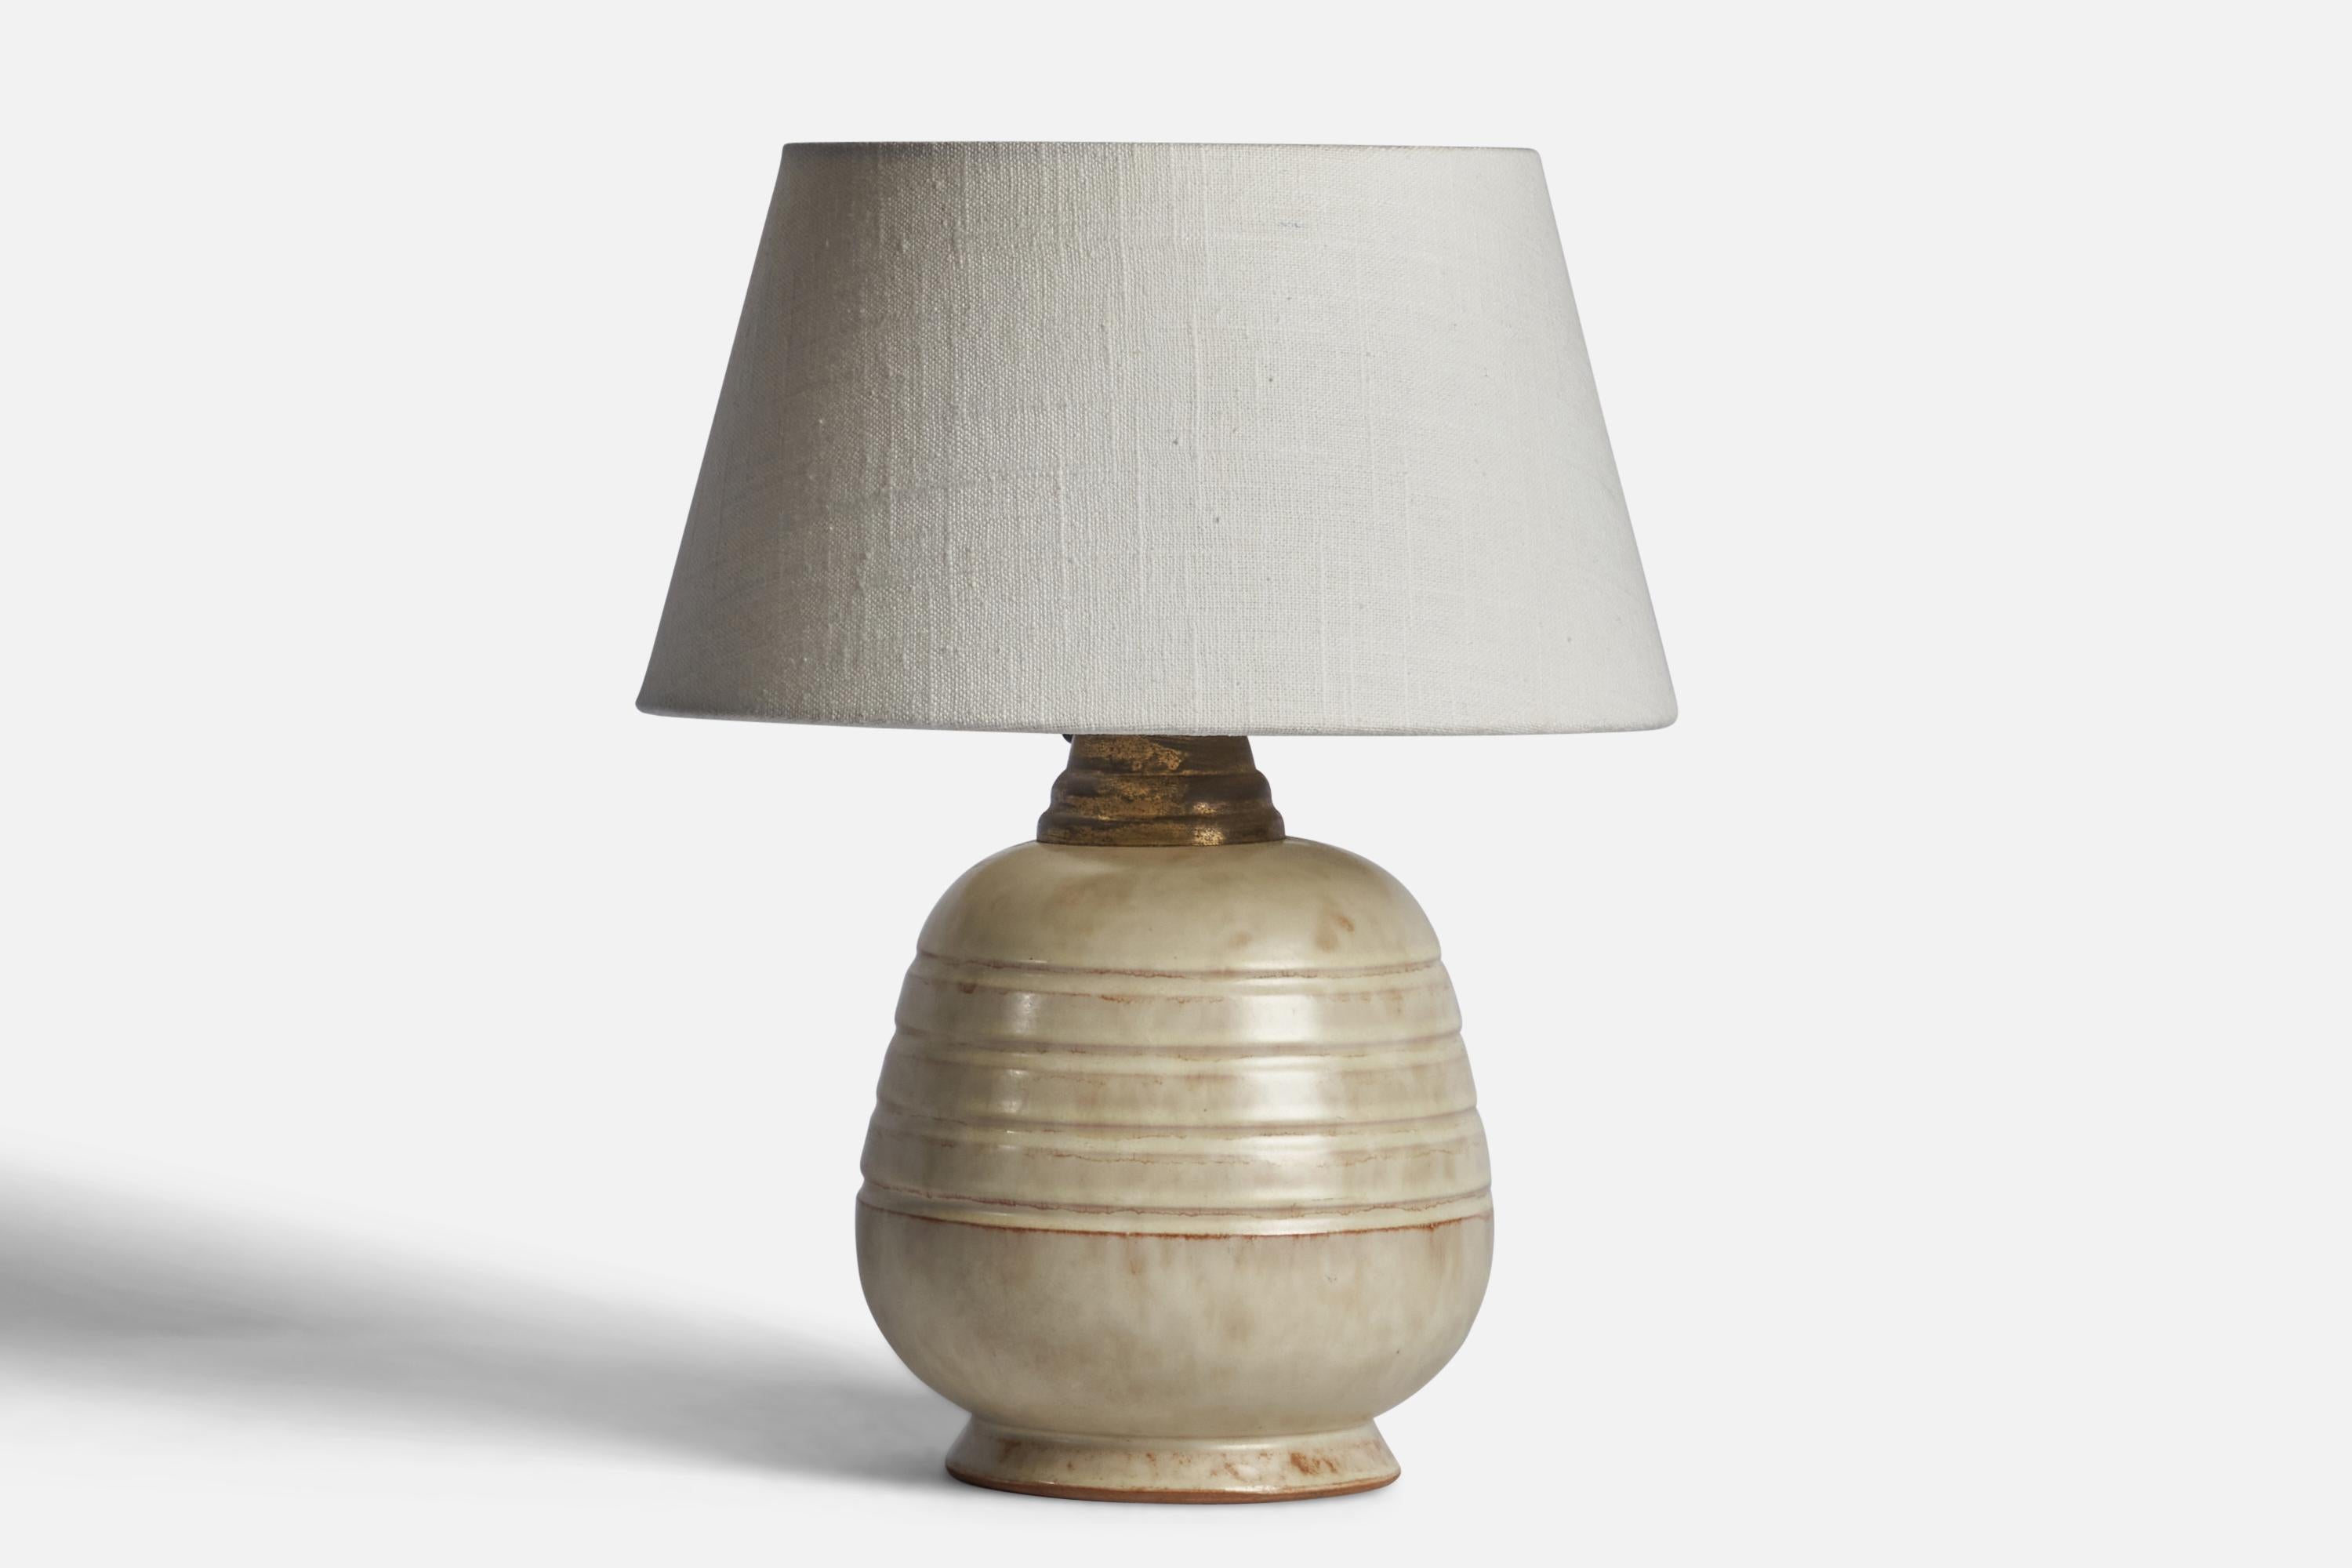 A light grey-glazed earthenware and brass table lamp designed and produced in Sweden, 1930s.

Dimensions of Lamp (inches): 10” H x 6” Diameter
Dimensions of Shade (inches): 7” Top Diameter x 10” Bottom Diameter x 5.5” H 
Dimensions of Lamp with